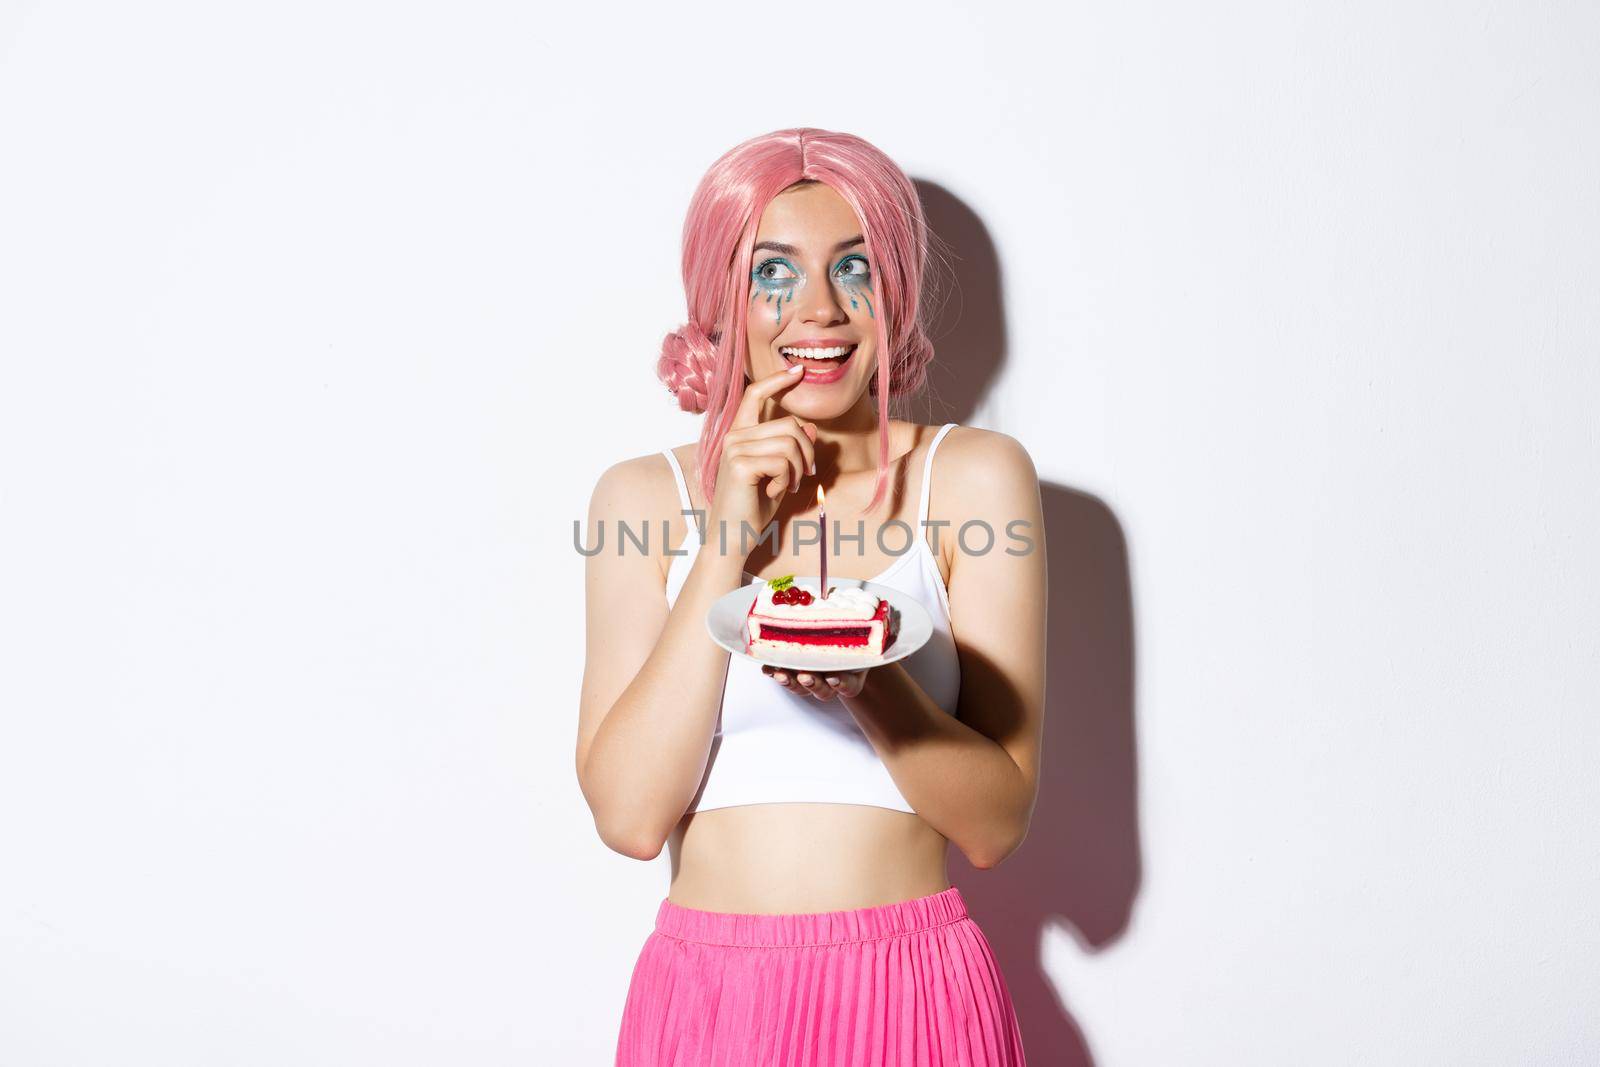 Portrait of lovely birthday girl in pink party wig, holding cake, thinking before making wish, standing over white background.